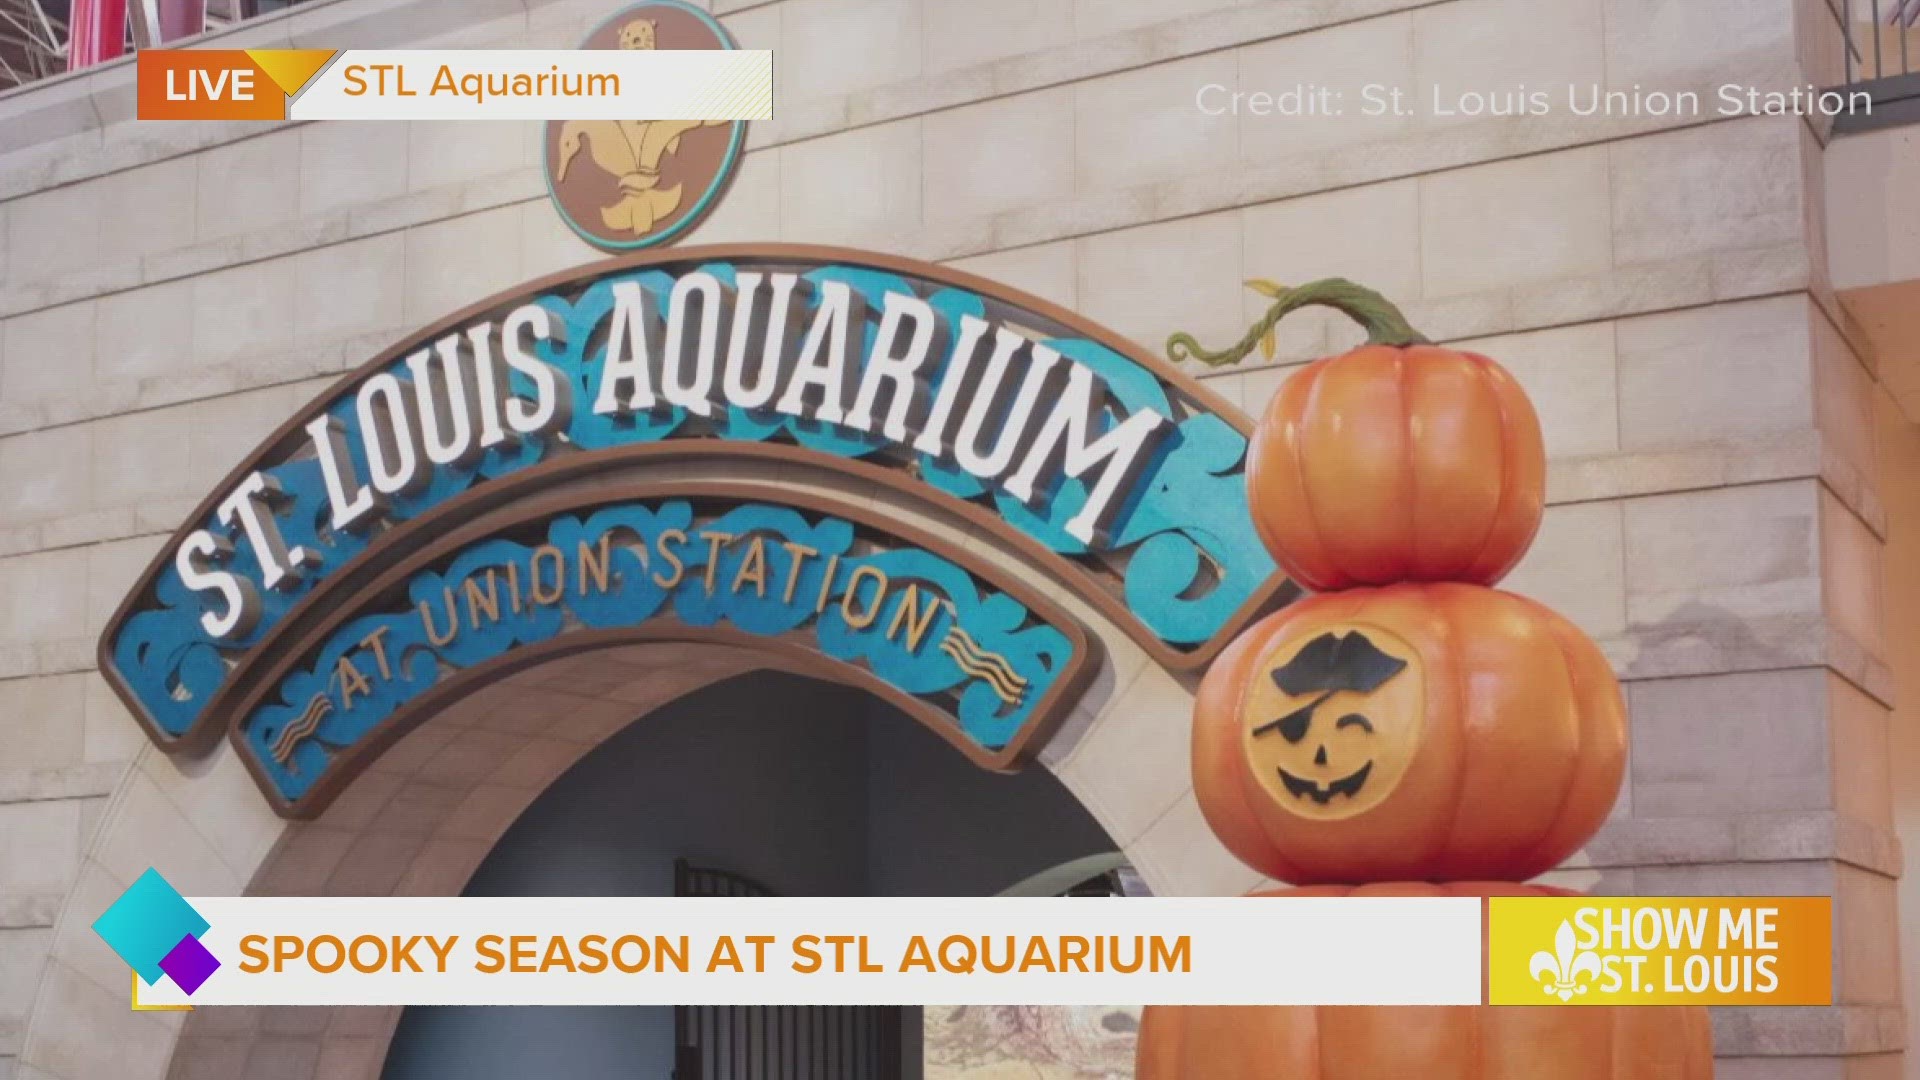 Pirates and Pumpkins includes special Trick or Treat Fridays and Saturdays in October from 5-8pm at the St. Louis Aquarium. Swim in for extra fun!